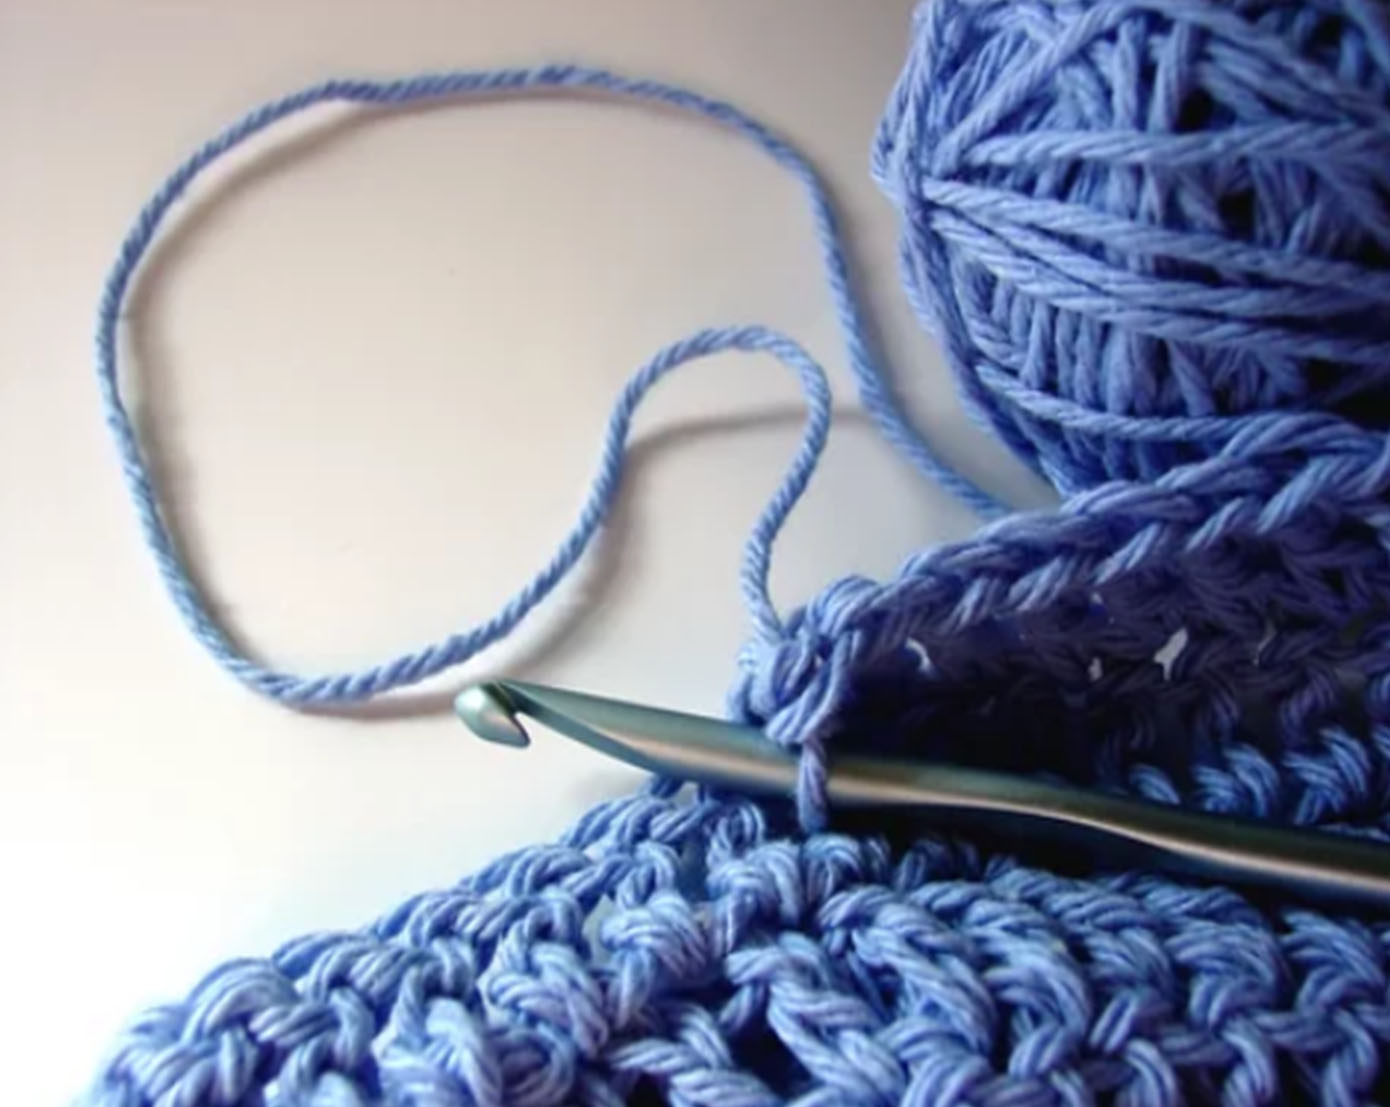 How to Make the Crossed Ripple Stitch: A Step-by-Step Guide